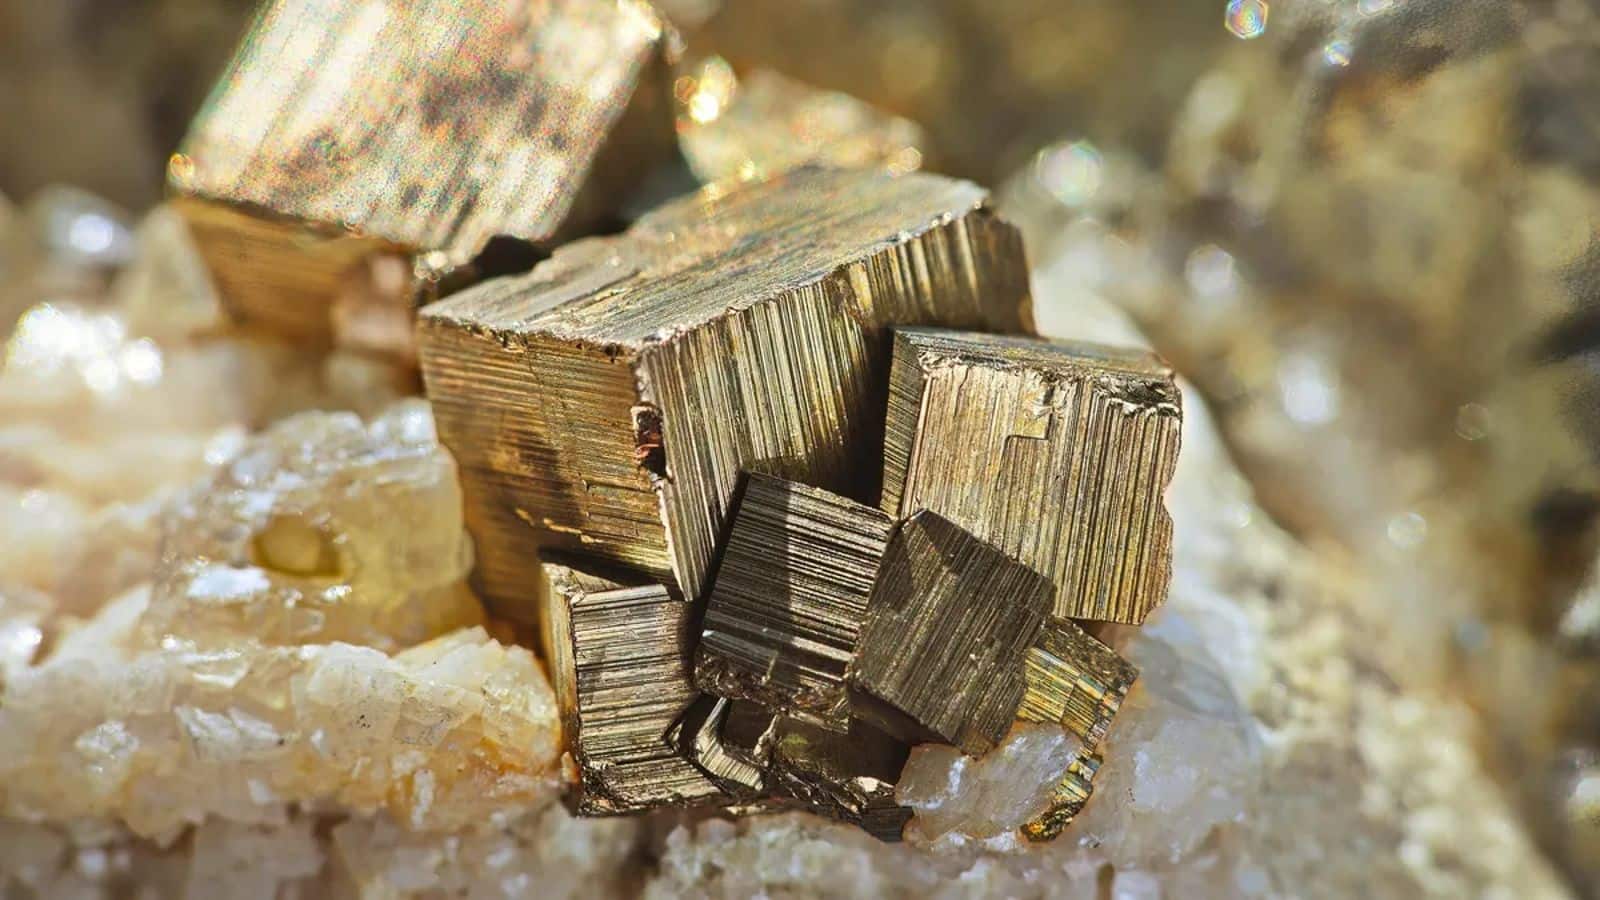 Fool's Gold reveals hidden lithium trace, new study finds